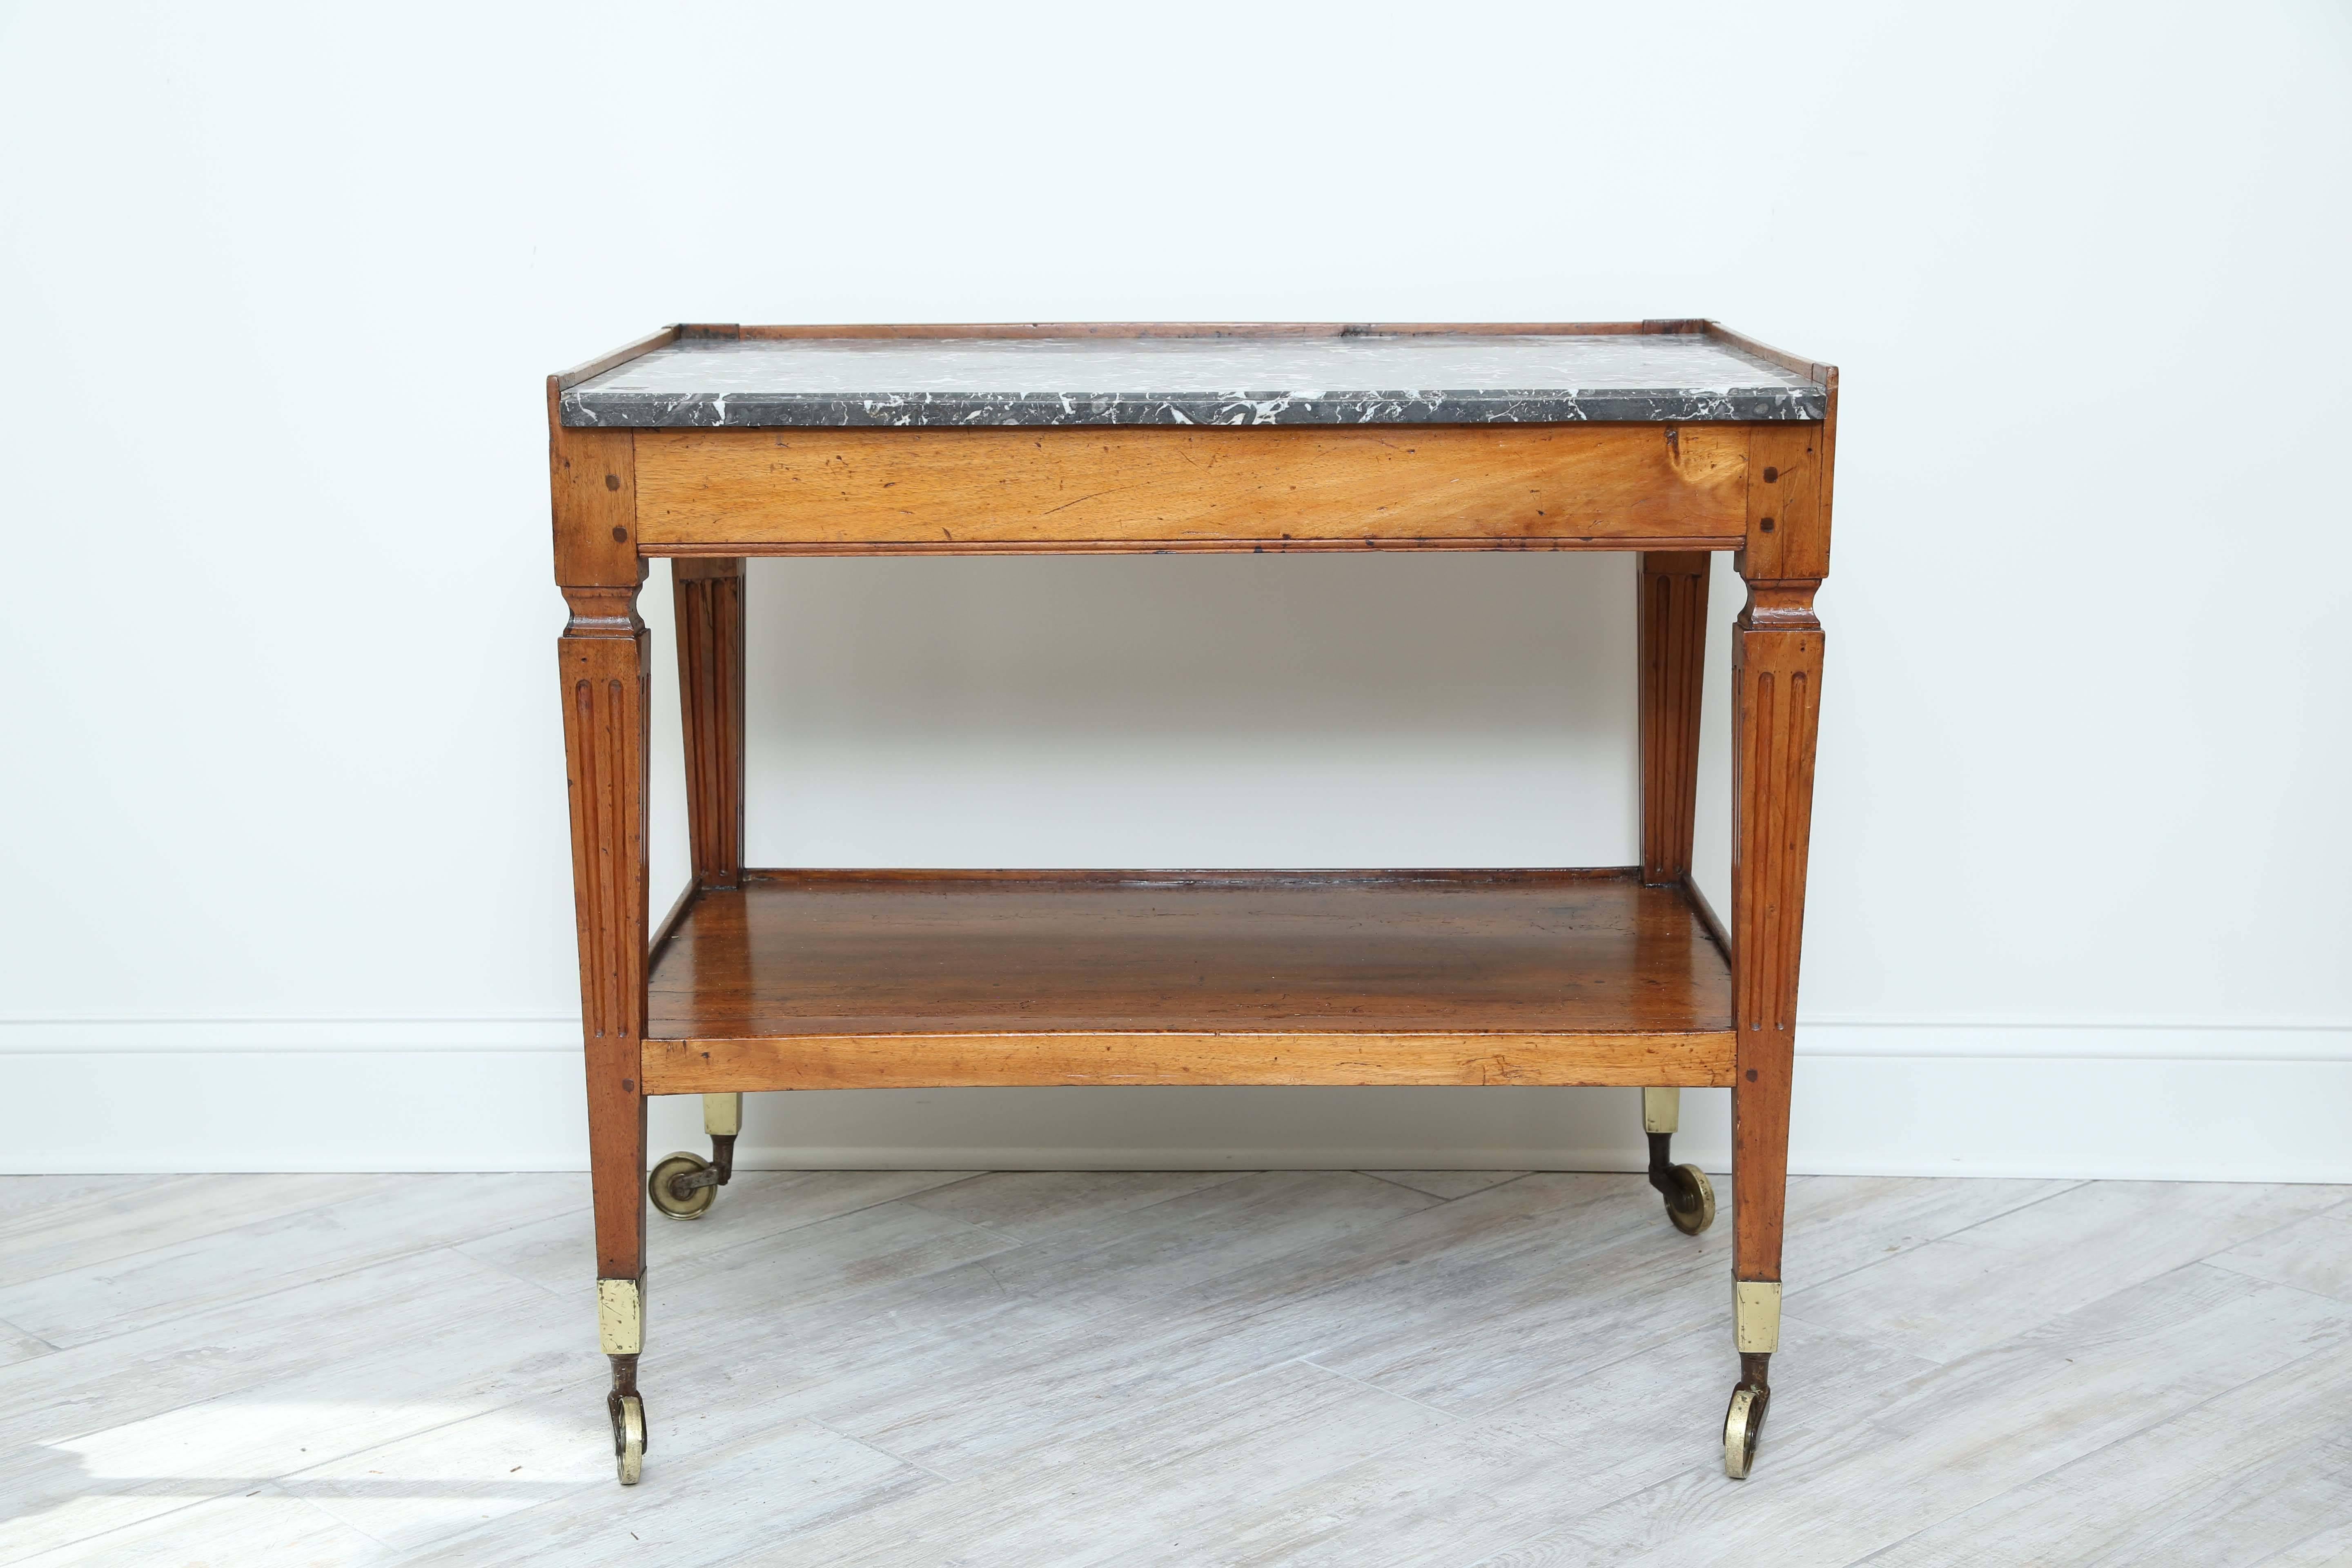 Antique two-tiered cart/work table with gray marble top and brass casters.